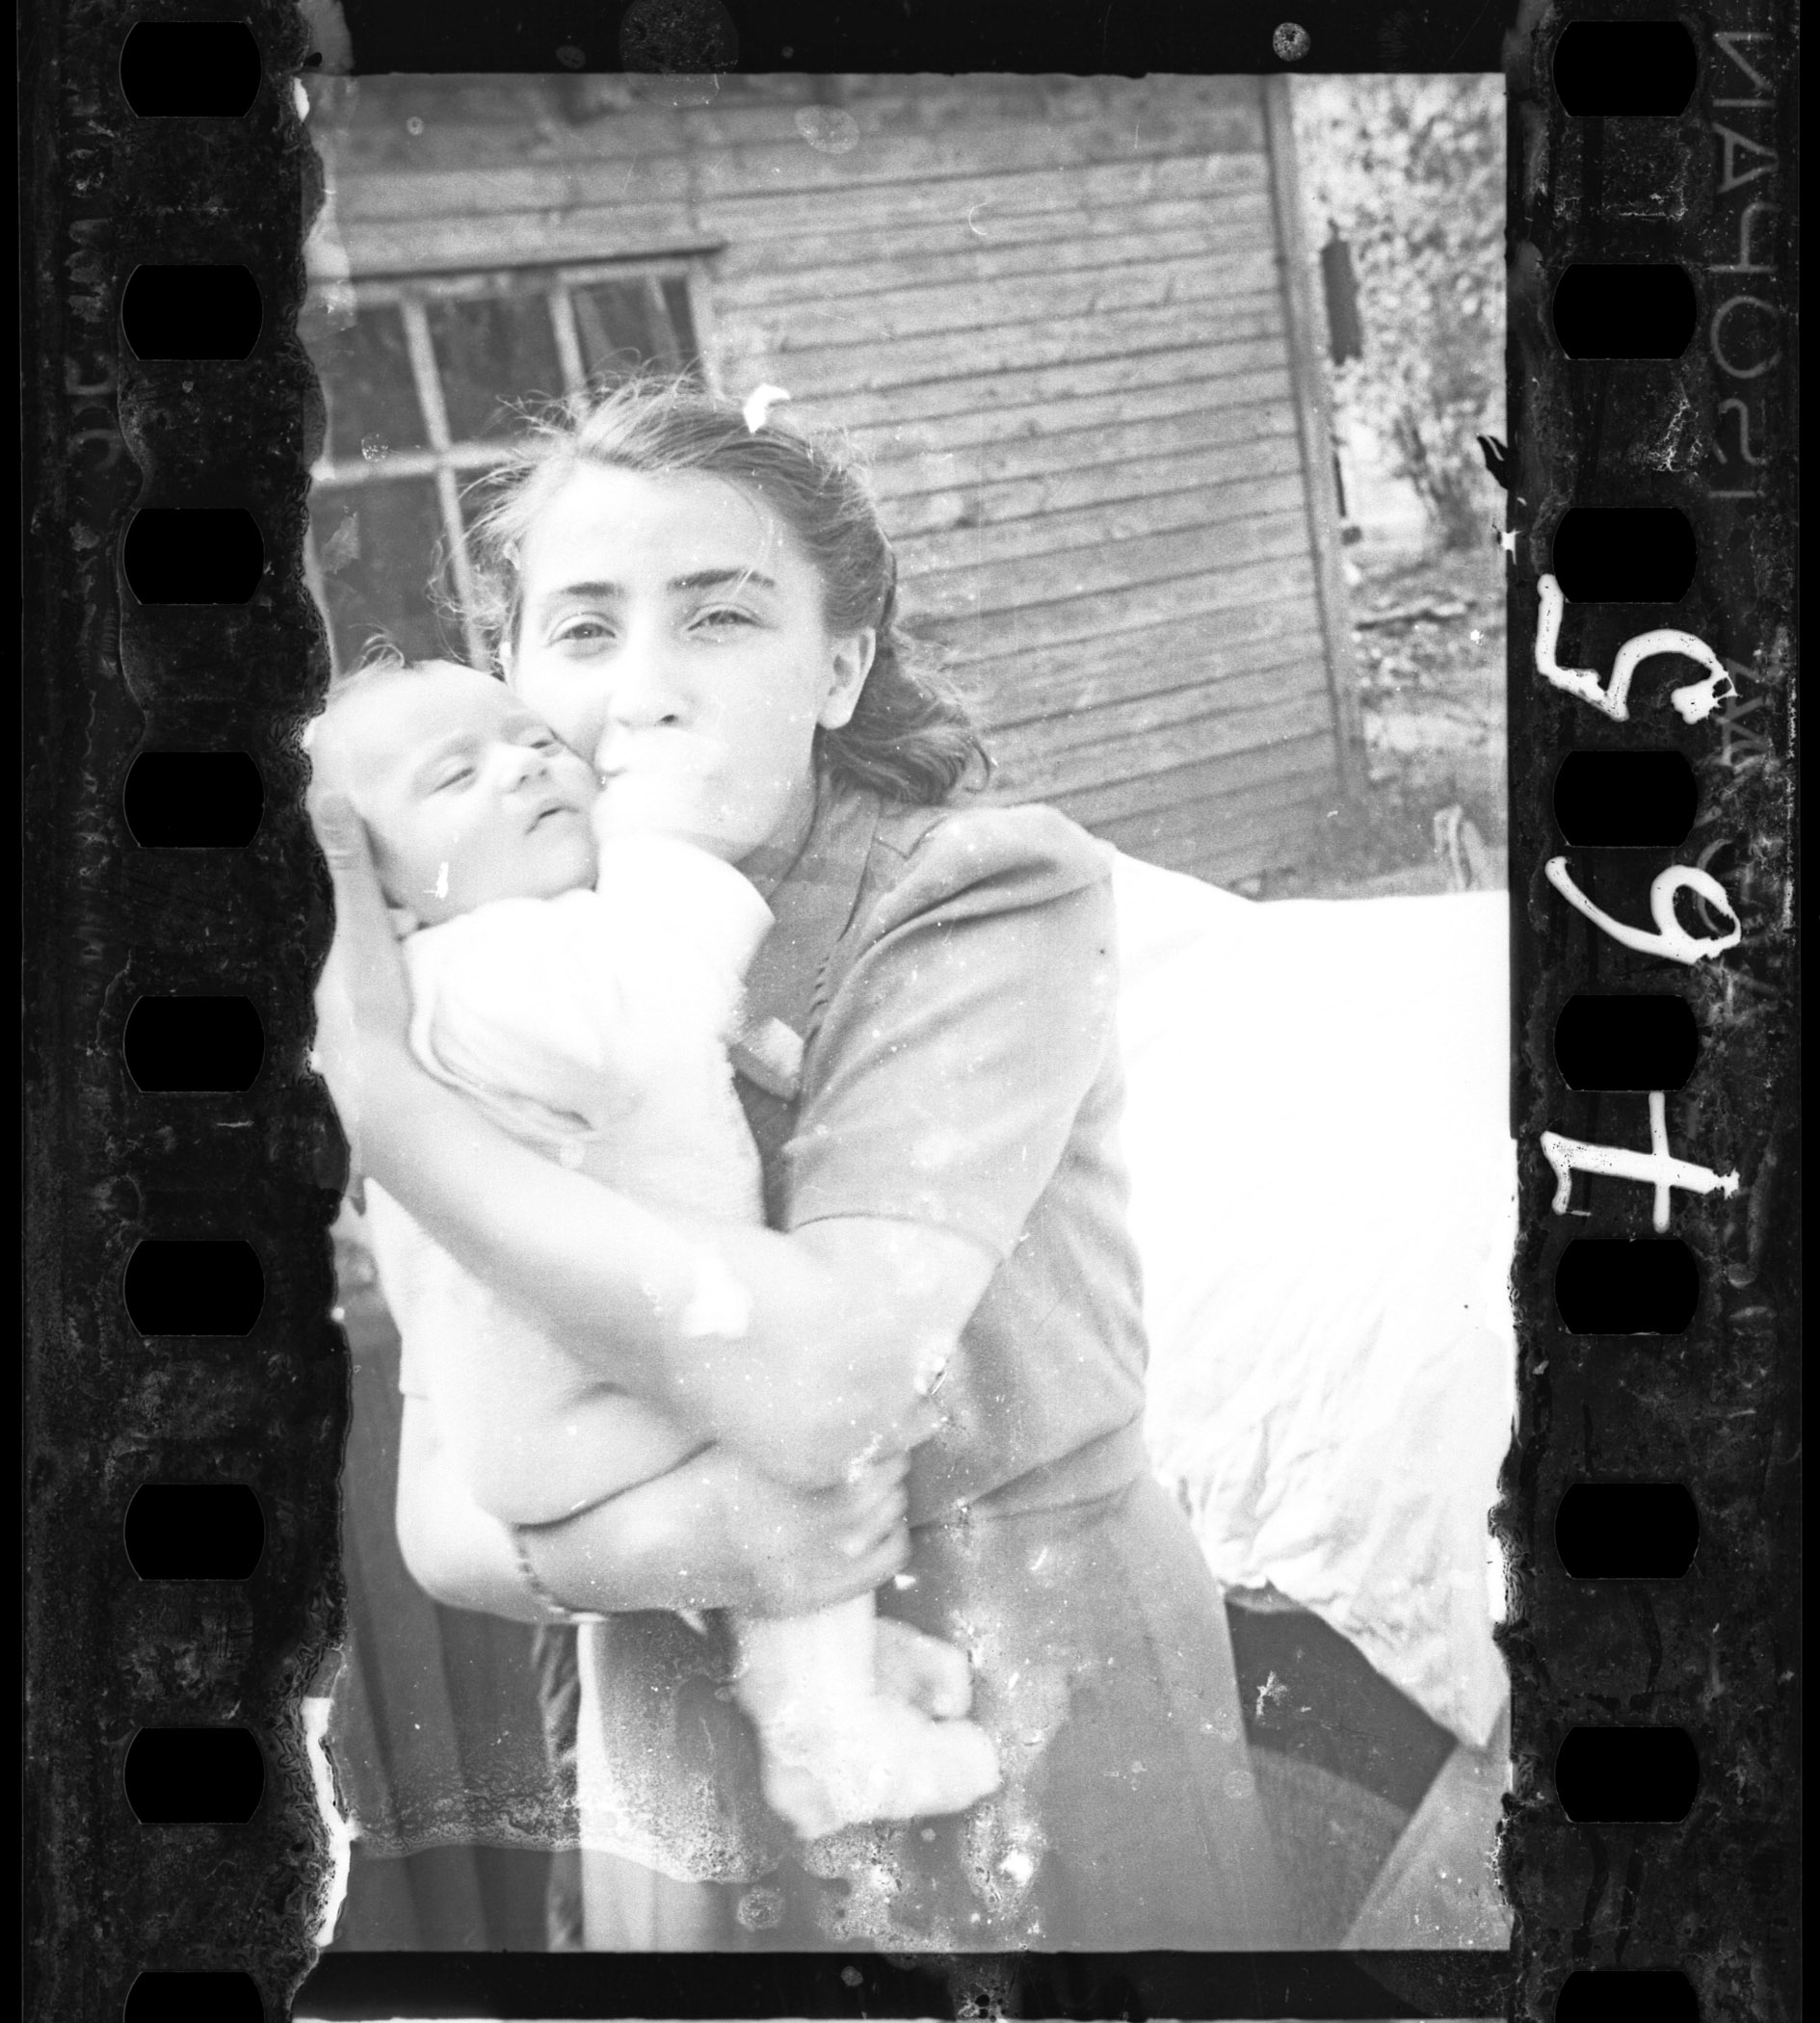     Henryk Ross, Lodz ghetto: Woman with her child (Ghetto policemenâ€™s family), 1940-42 Art Gallery of Ontario Gift from Archive of Modern Conflict, 2007 Â© Art Gallery of Ontario

